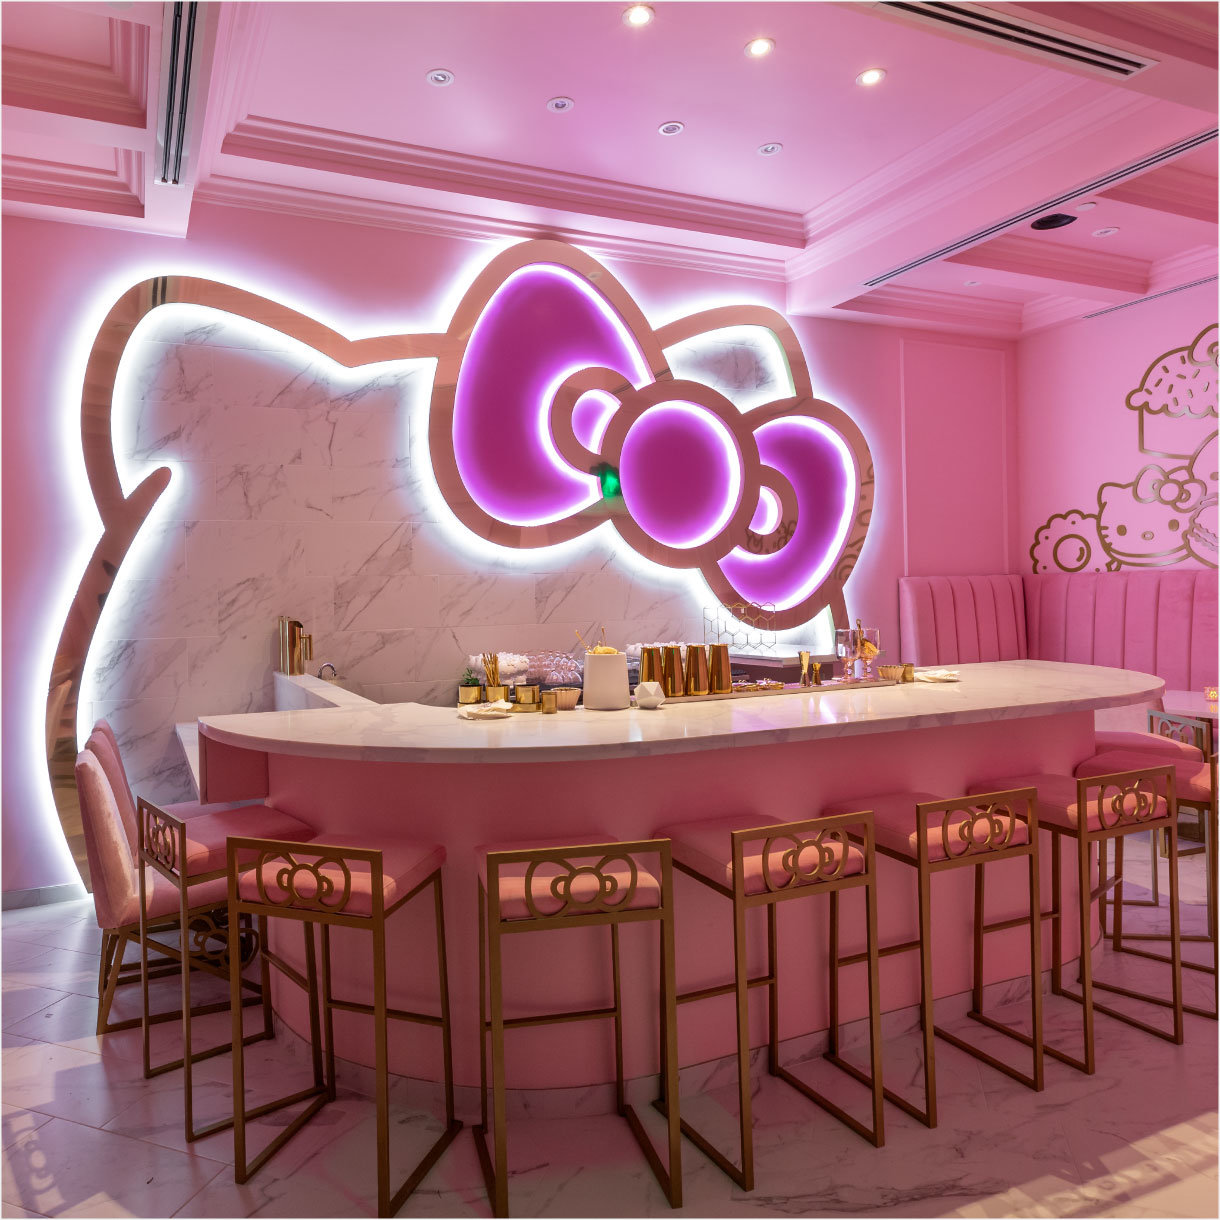 Hello Kitty Cafe Website Grand Cafe Bow Room Img A ?quality=90&strip=info